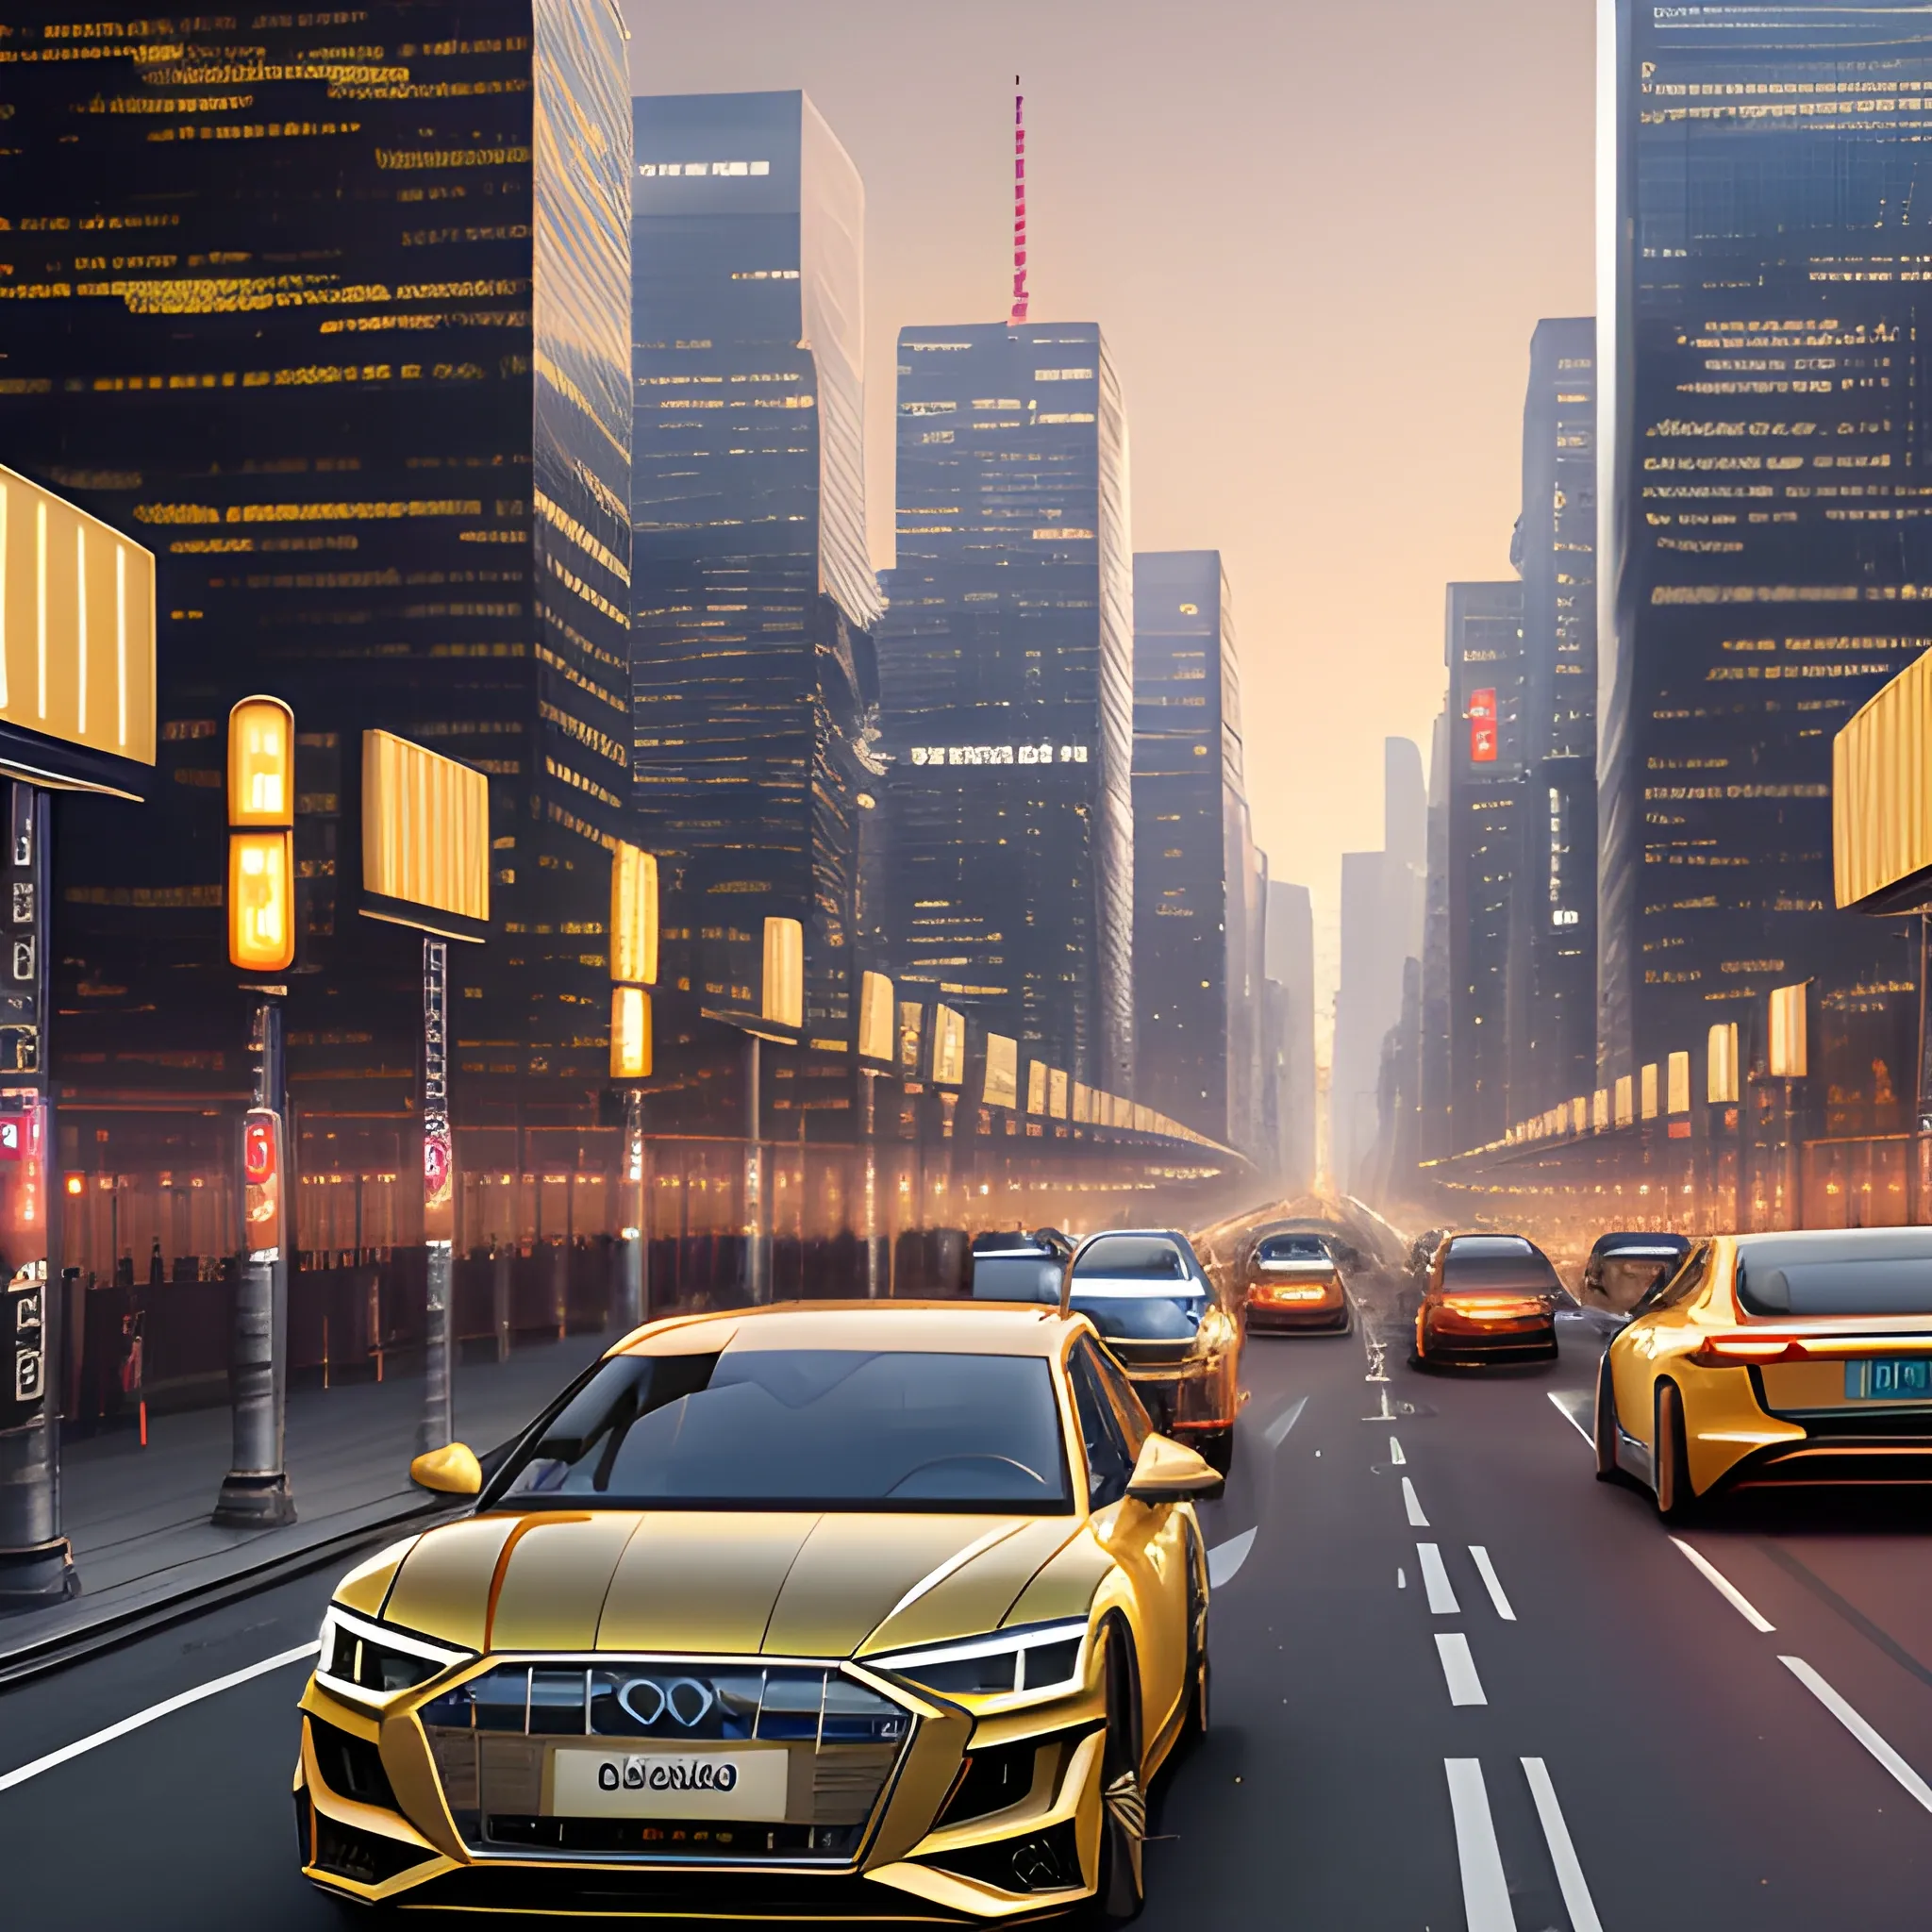 A sprawling metropolis bathes in a warm, golden light as a sleek Audi A6 e-tron hybrid spearheads a fleet of city-dwelling electric and hybrid vehicles on a futuristic, elevated highway. The futuristic cars weave through a labyrinth of curvaceous skyscrapers as streetlights and billboards illuminate the city's vibrant, high-tech atmosphere.
